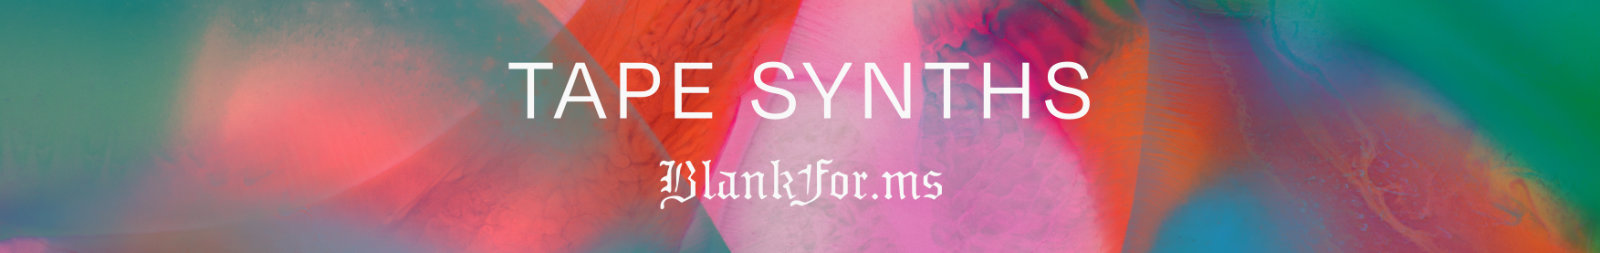 Blankfor.ms Tape Synth Banner